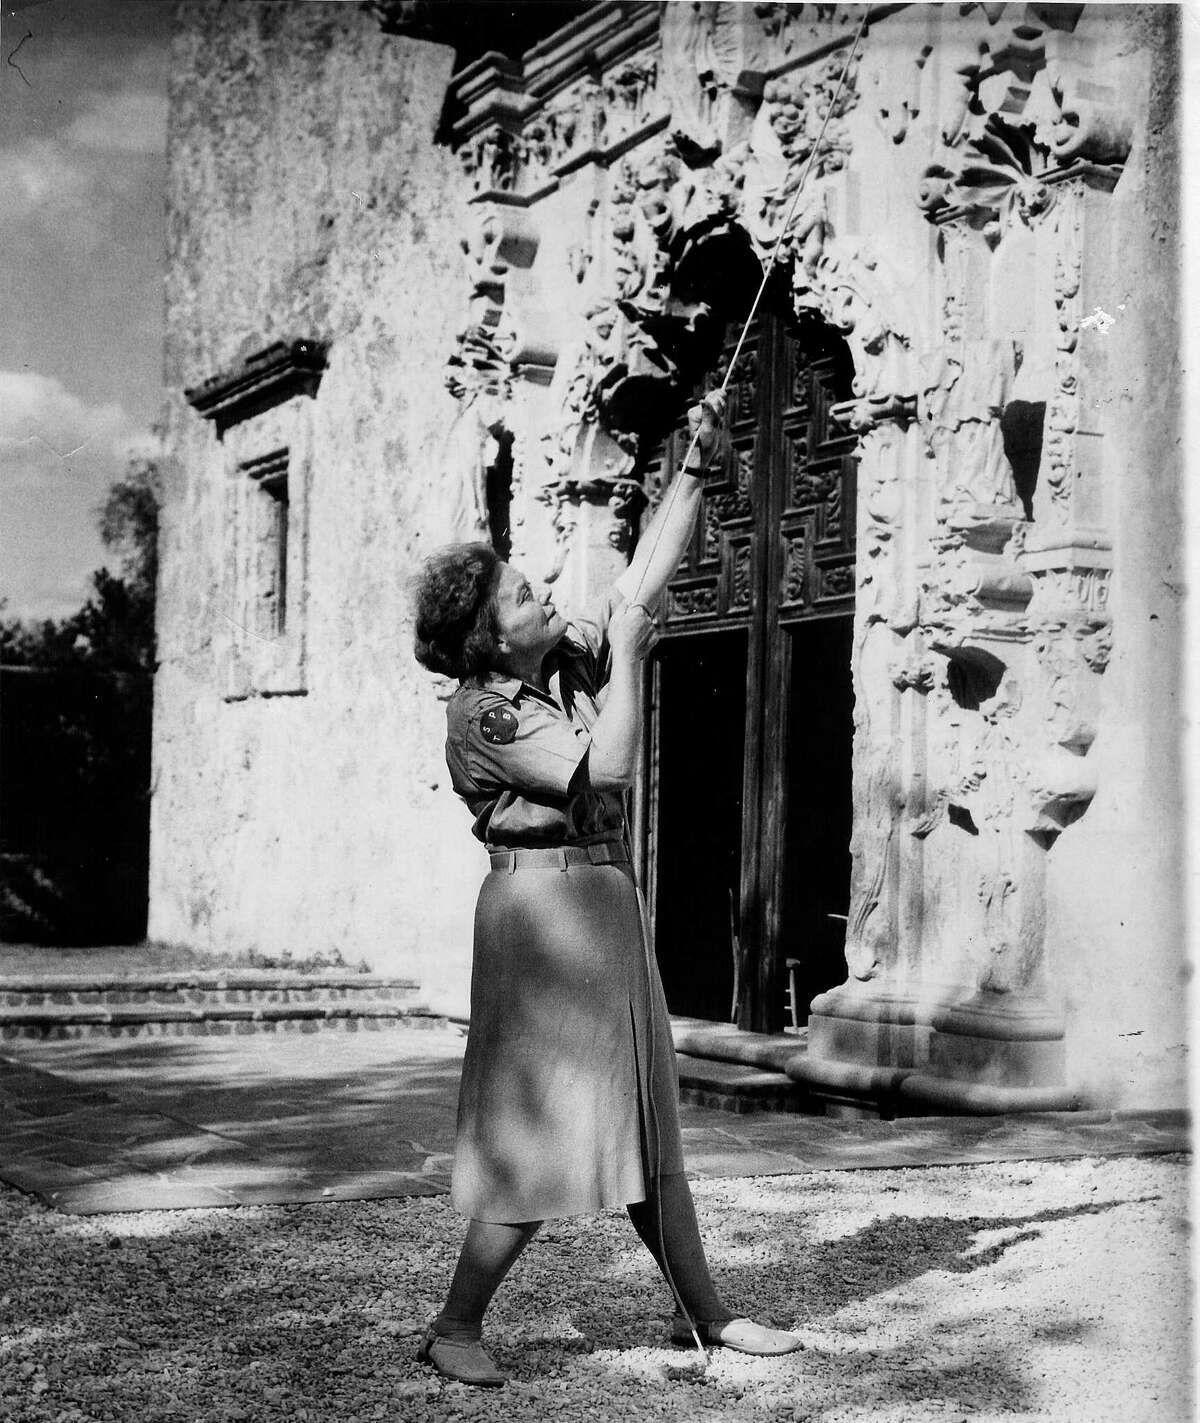 Ethel Wilson Harris rings the San José Mission bell in her Texas State Parks Board uniform, circa 1941.